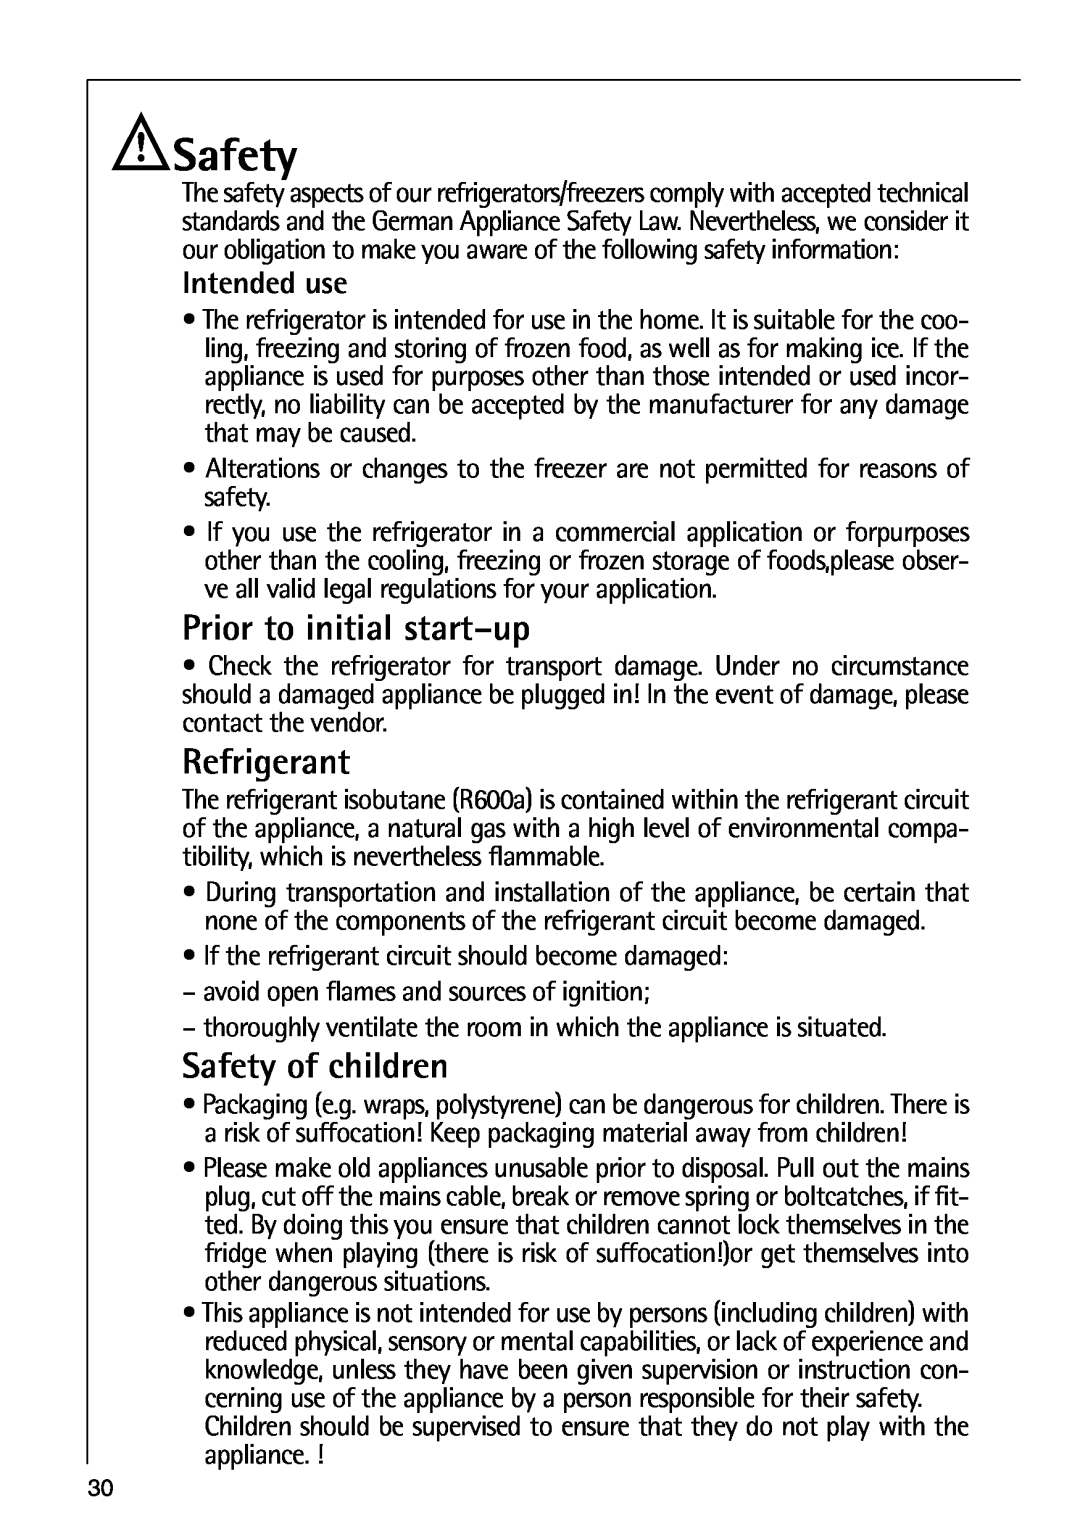 AEG 80318-5 KG user manual Prior to initial start-up, Refrigerant, Safety of children, Intended use 